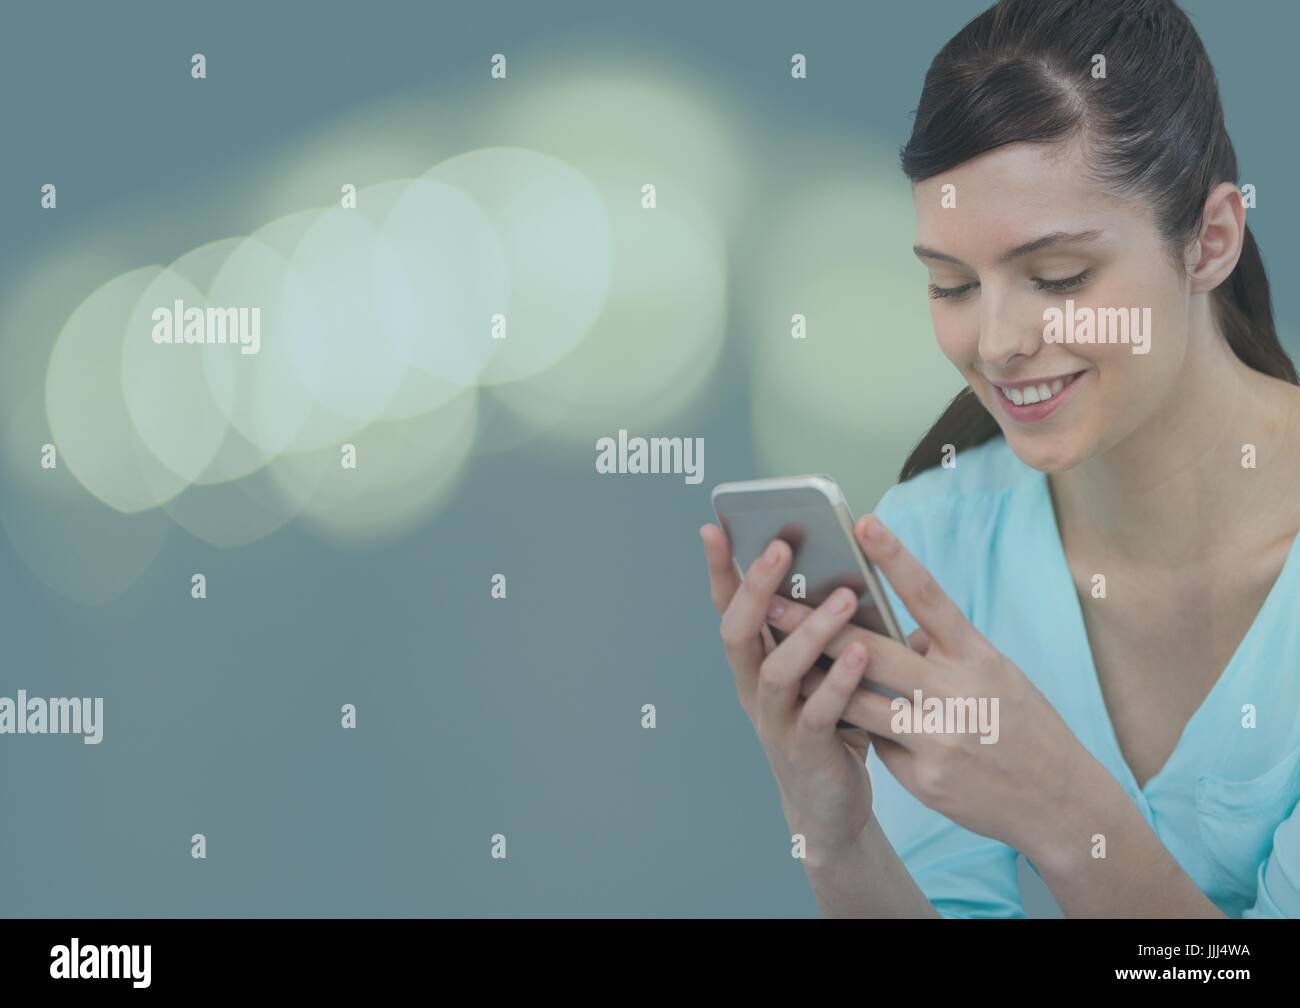 Smiling woman texting with colored lights in background Stock Photo